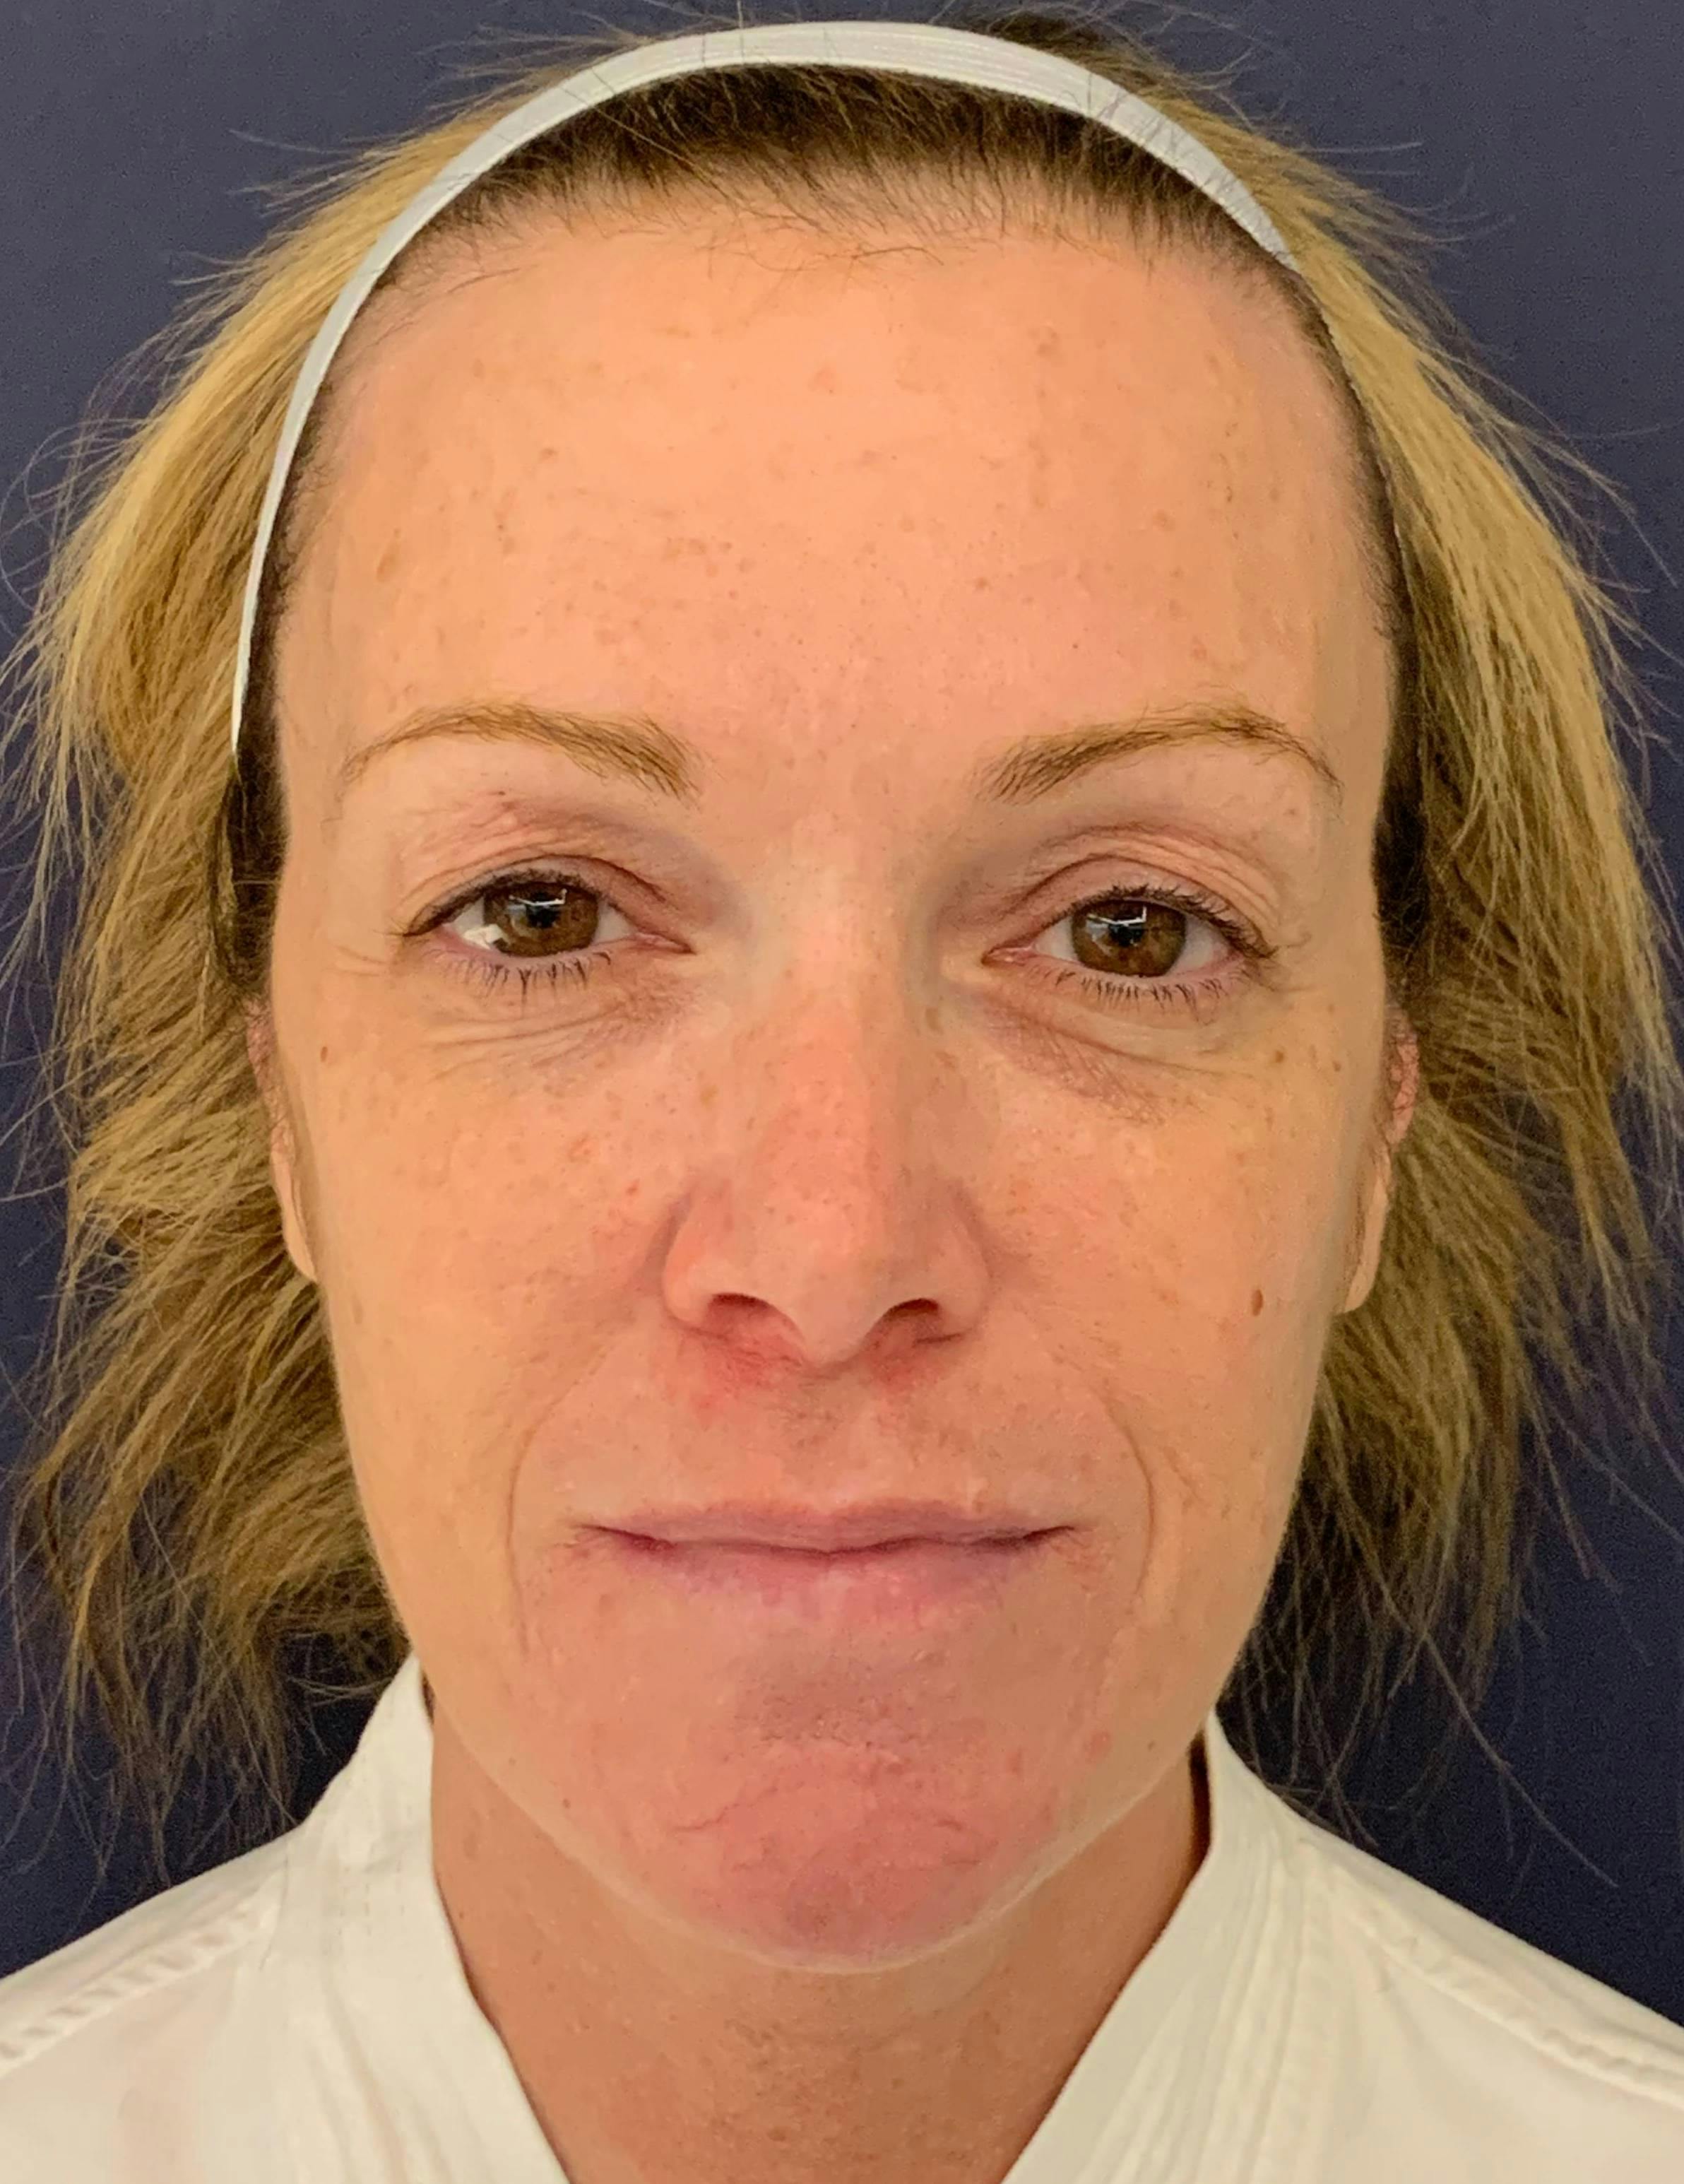 Blepharoplasty (Eyelid Surgery) Before & After Gallery - Patient 4447876 - Image 1